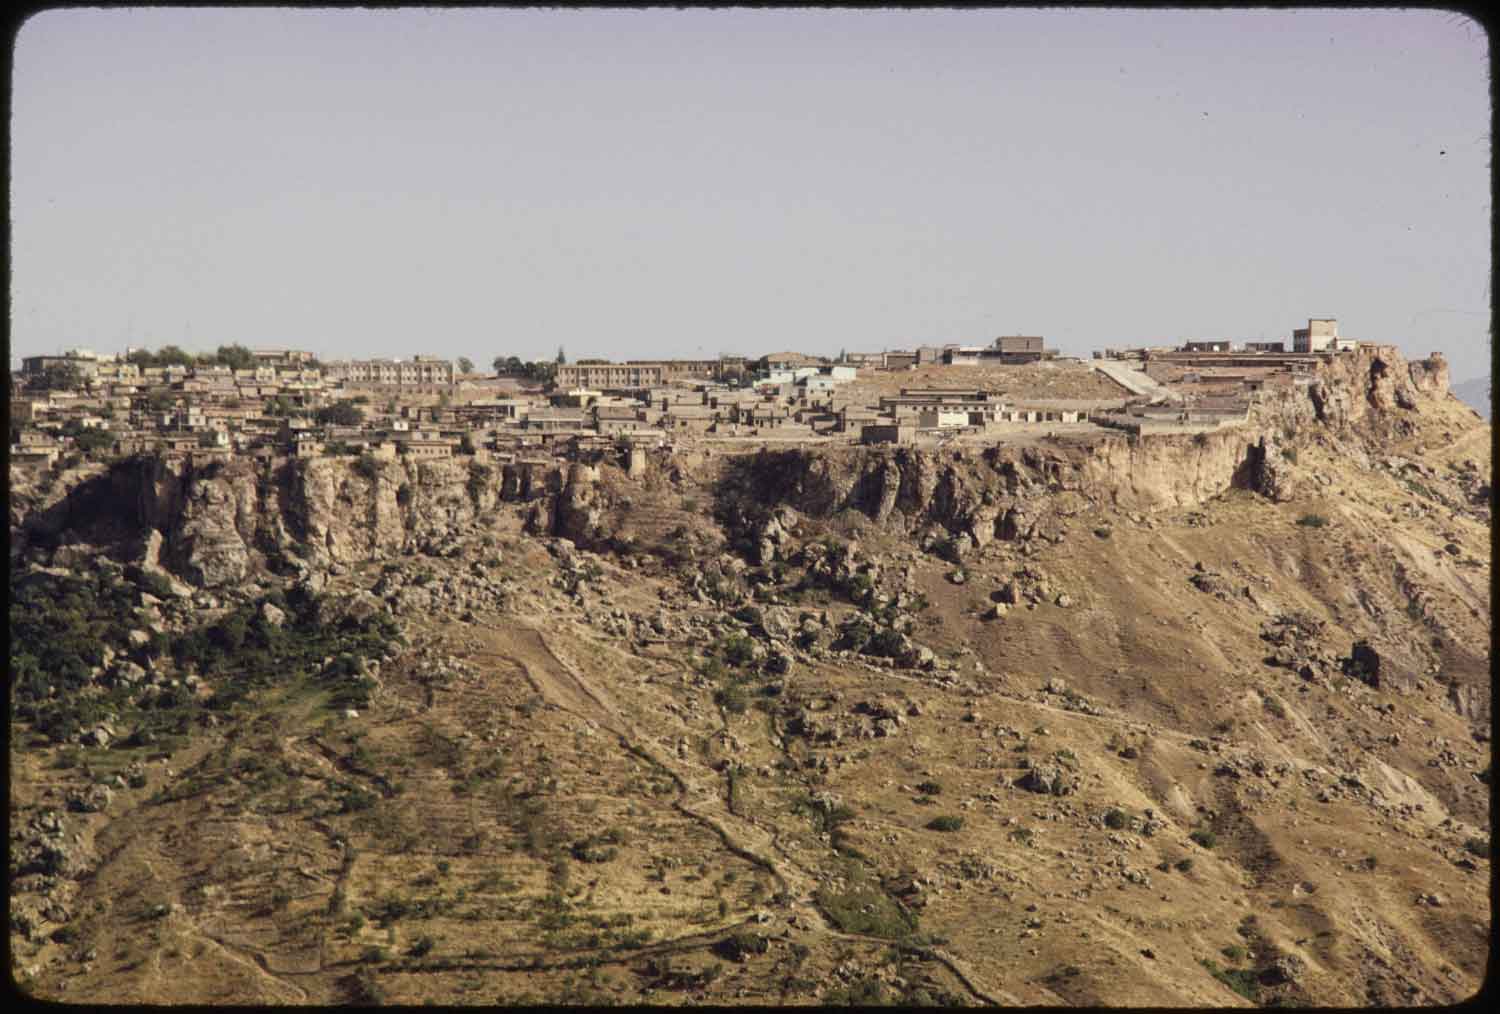 View of village of Amadiyya in the Dohuk Province of Iraq.